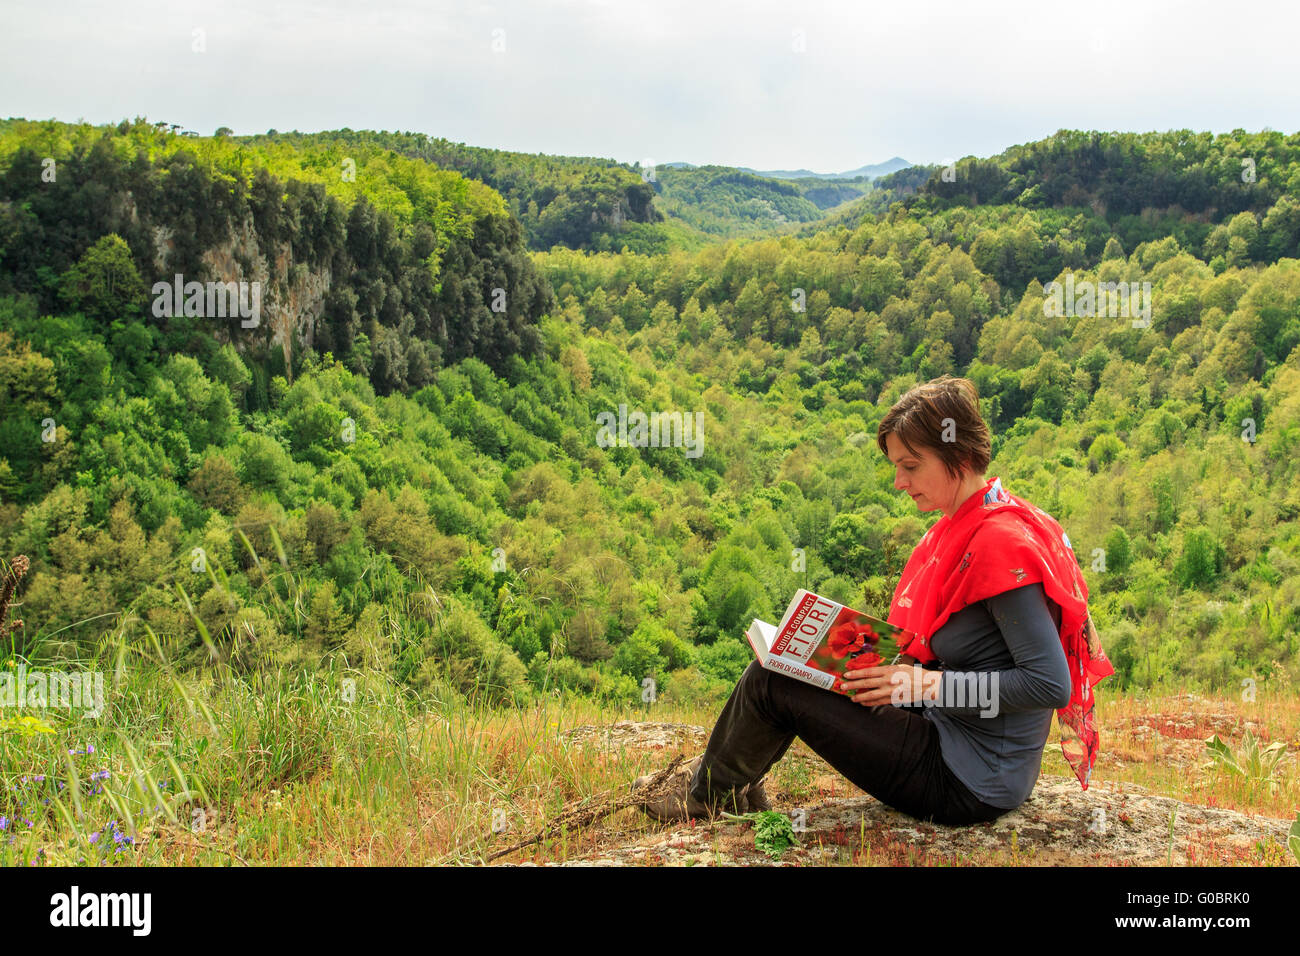 Woman reading a book on flowers with a beautiful forest background Stock Photo